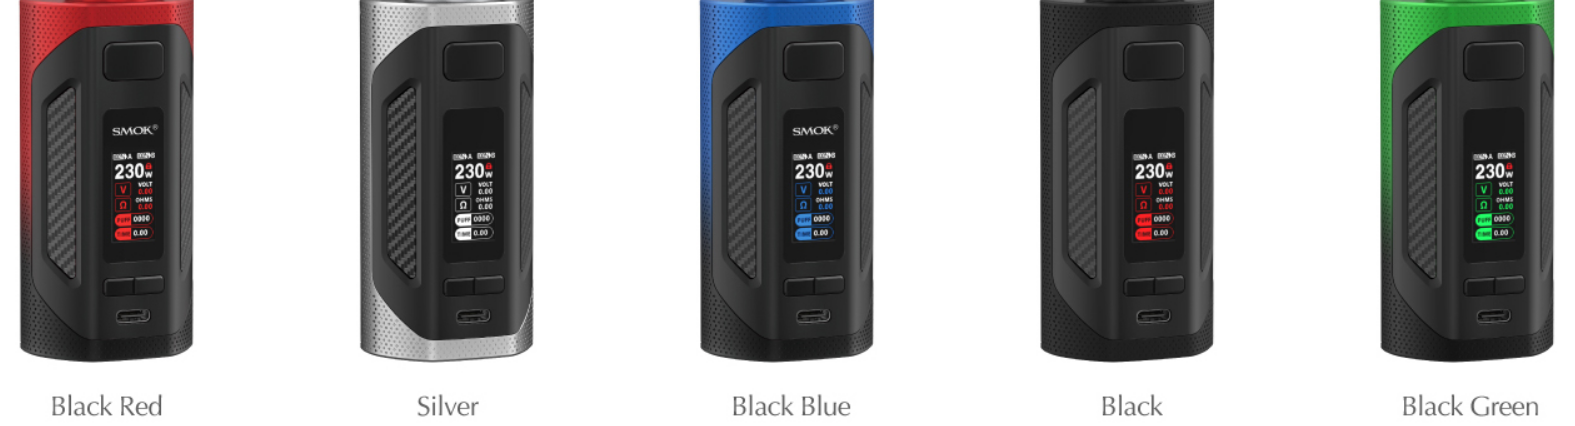 https://cdn.shopify.com/s/files/1/0250/6699/5800/products/SMOK20200815.png